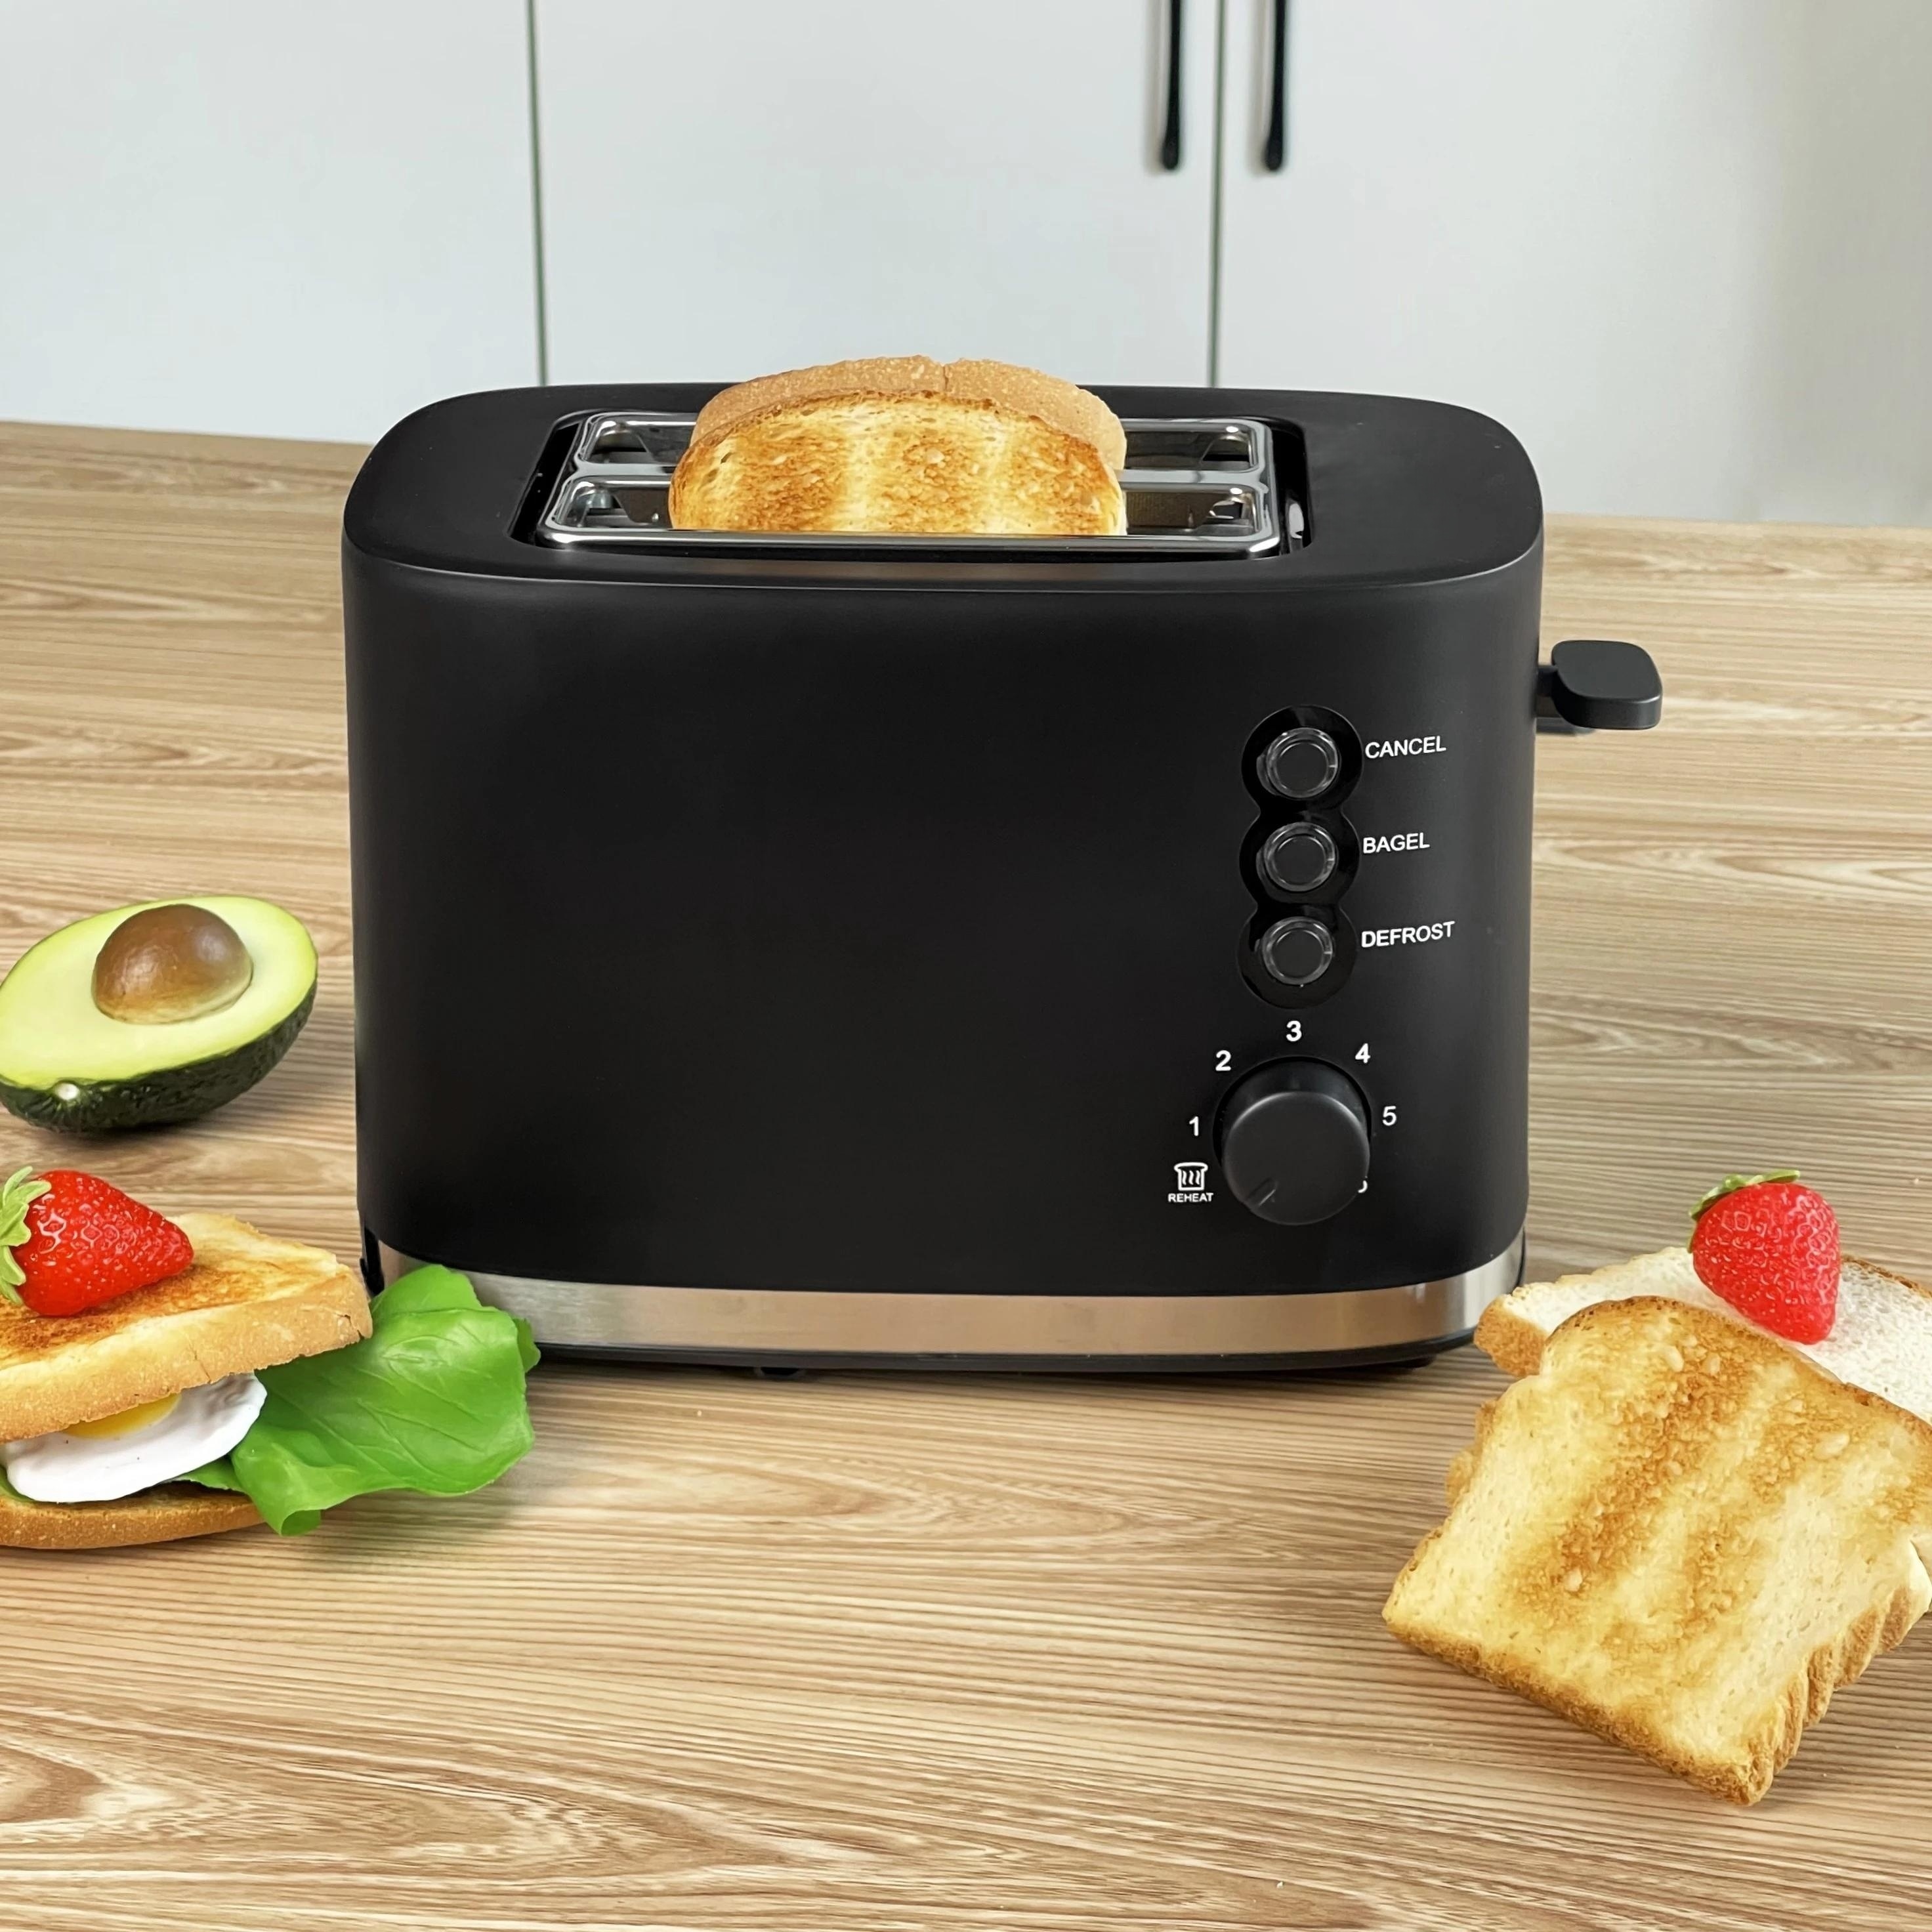 2 Toaster, Extra Wide Slots Black Toaster With Reheat, Bagel, Defrost,  Cancel Function, 6-shade Settings, Removable Crumb Tray And High Lift Lever  Classic Bread Toaster, Cookware, Kitchenware, Kitchen Stuff Small Kitchen  Appliance 